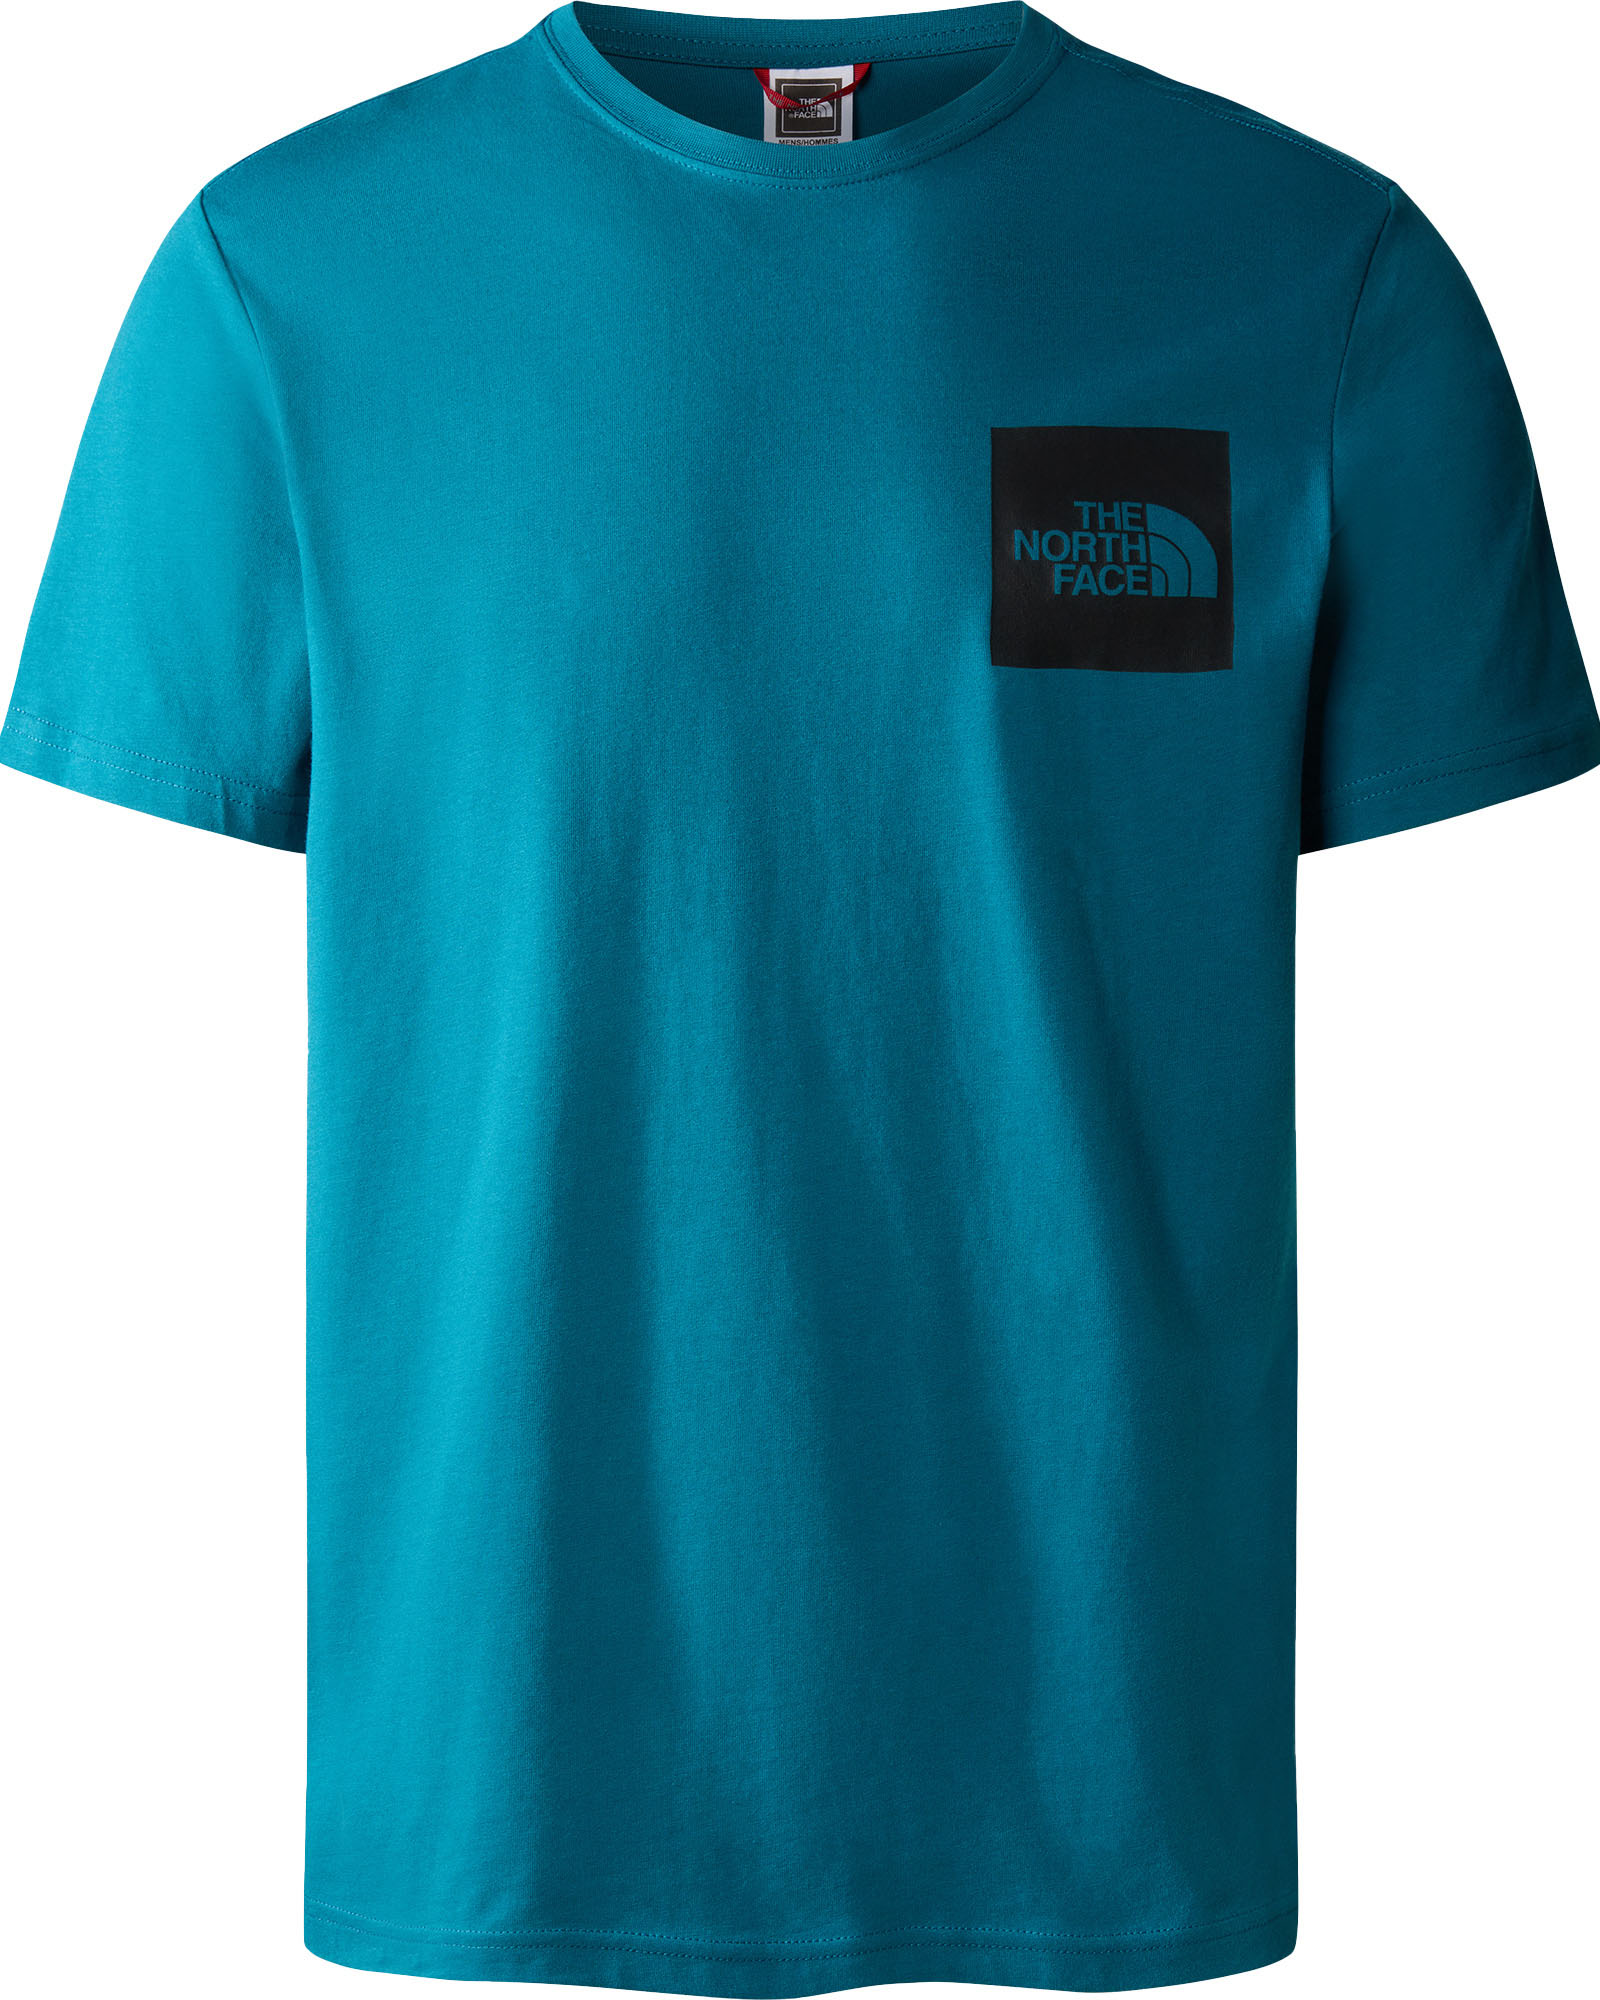 The North Face Fine Men’s Tee - Blue Coral L